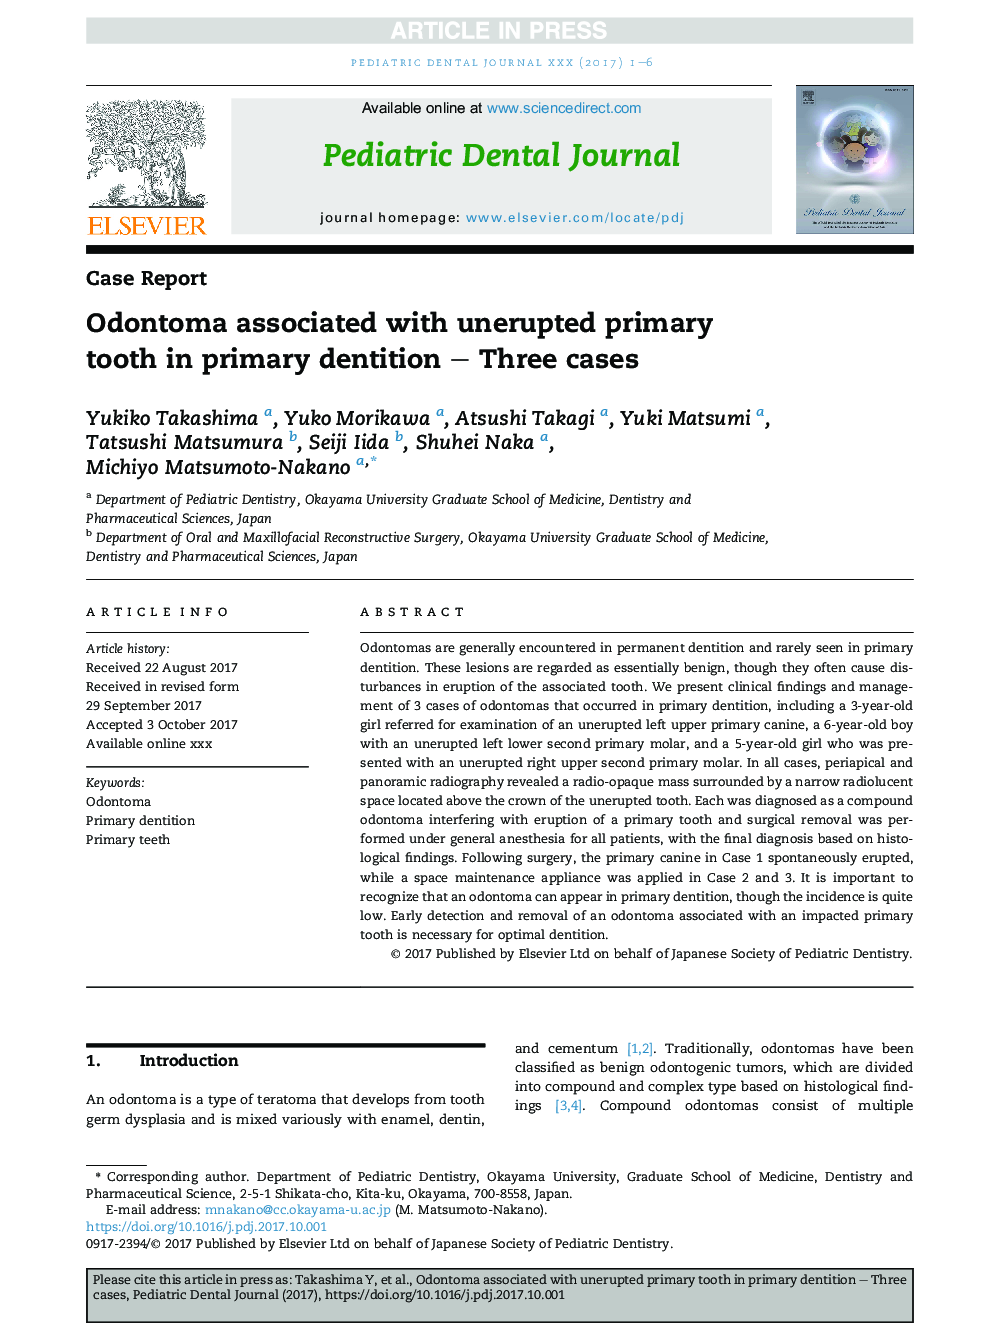 Odontoma associated with unerupted primary tooth in primary dentition - Three cases